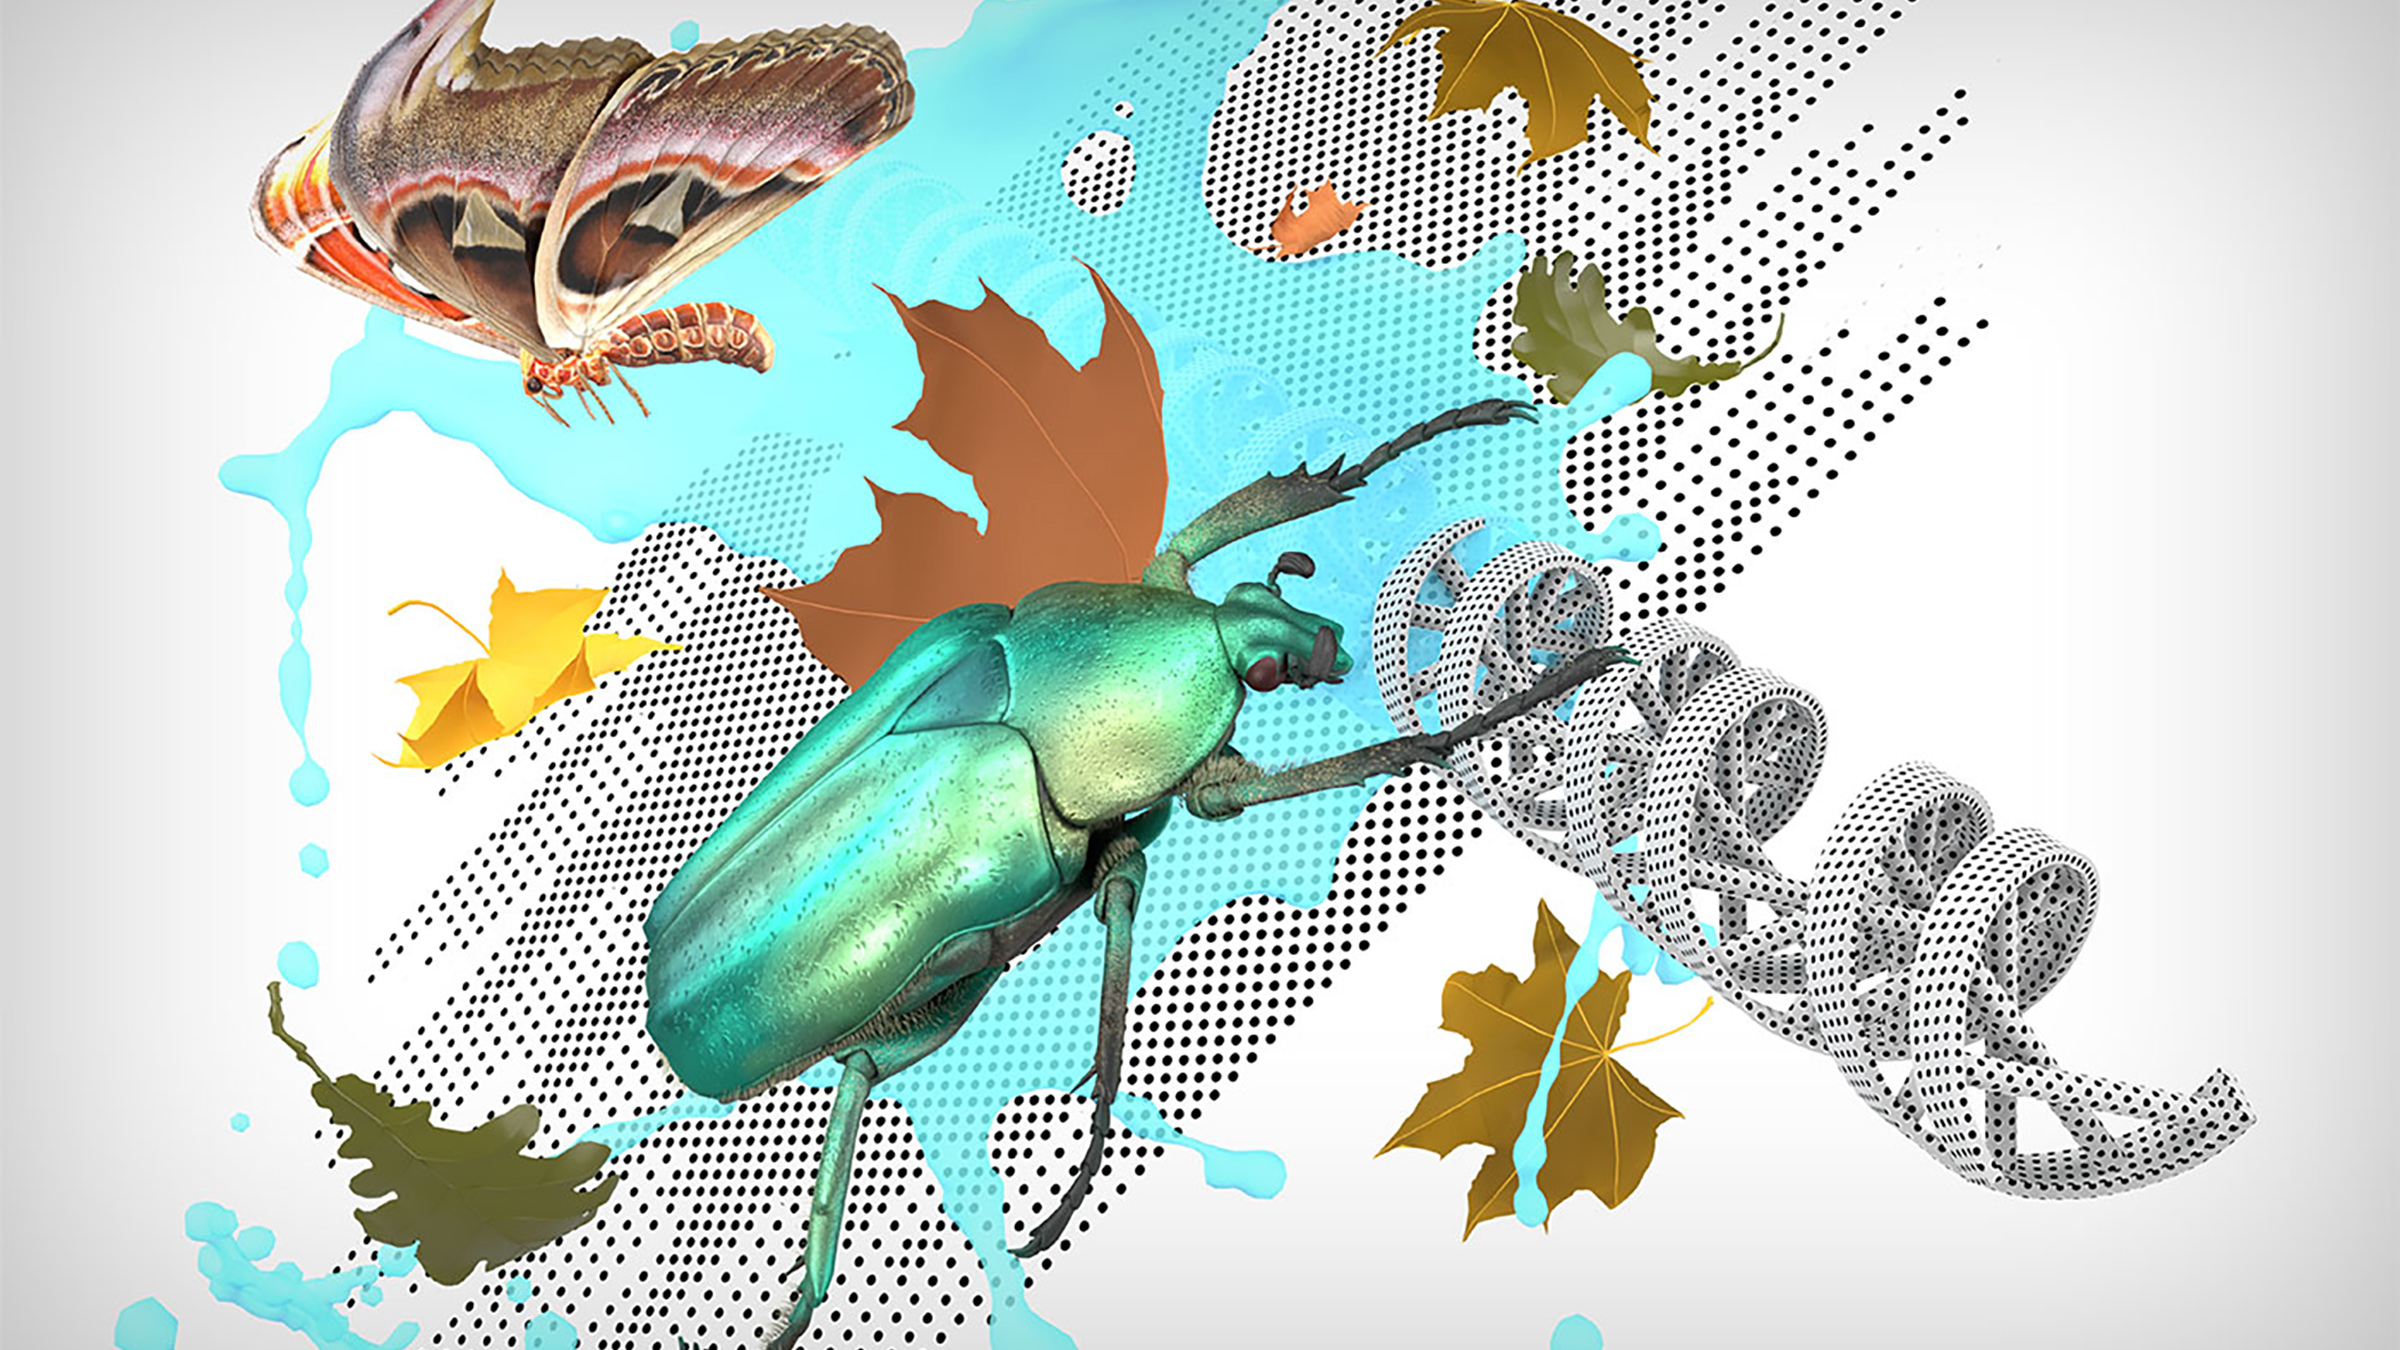 A montage of beetles, leaves, butterflies and DNA